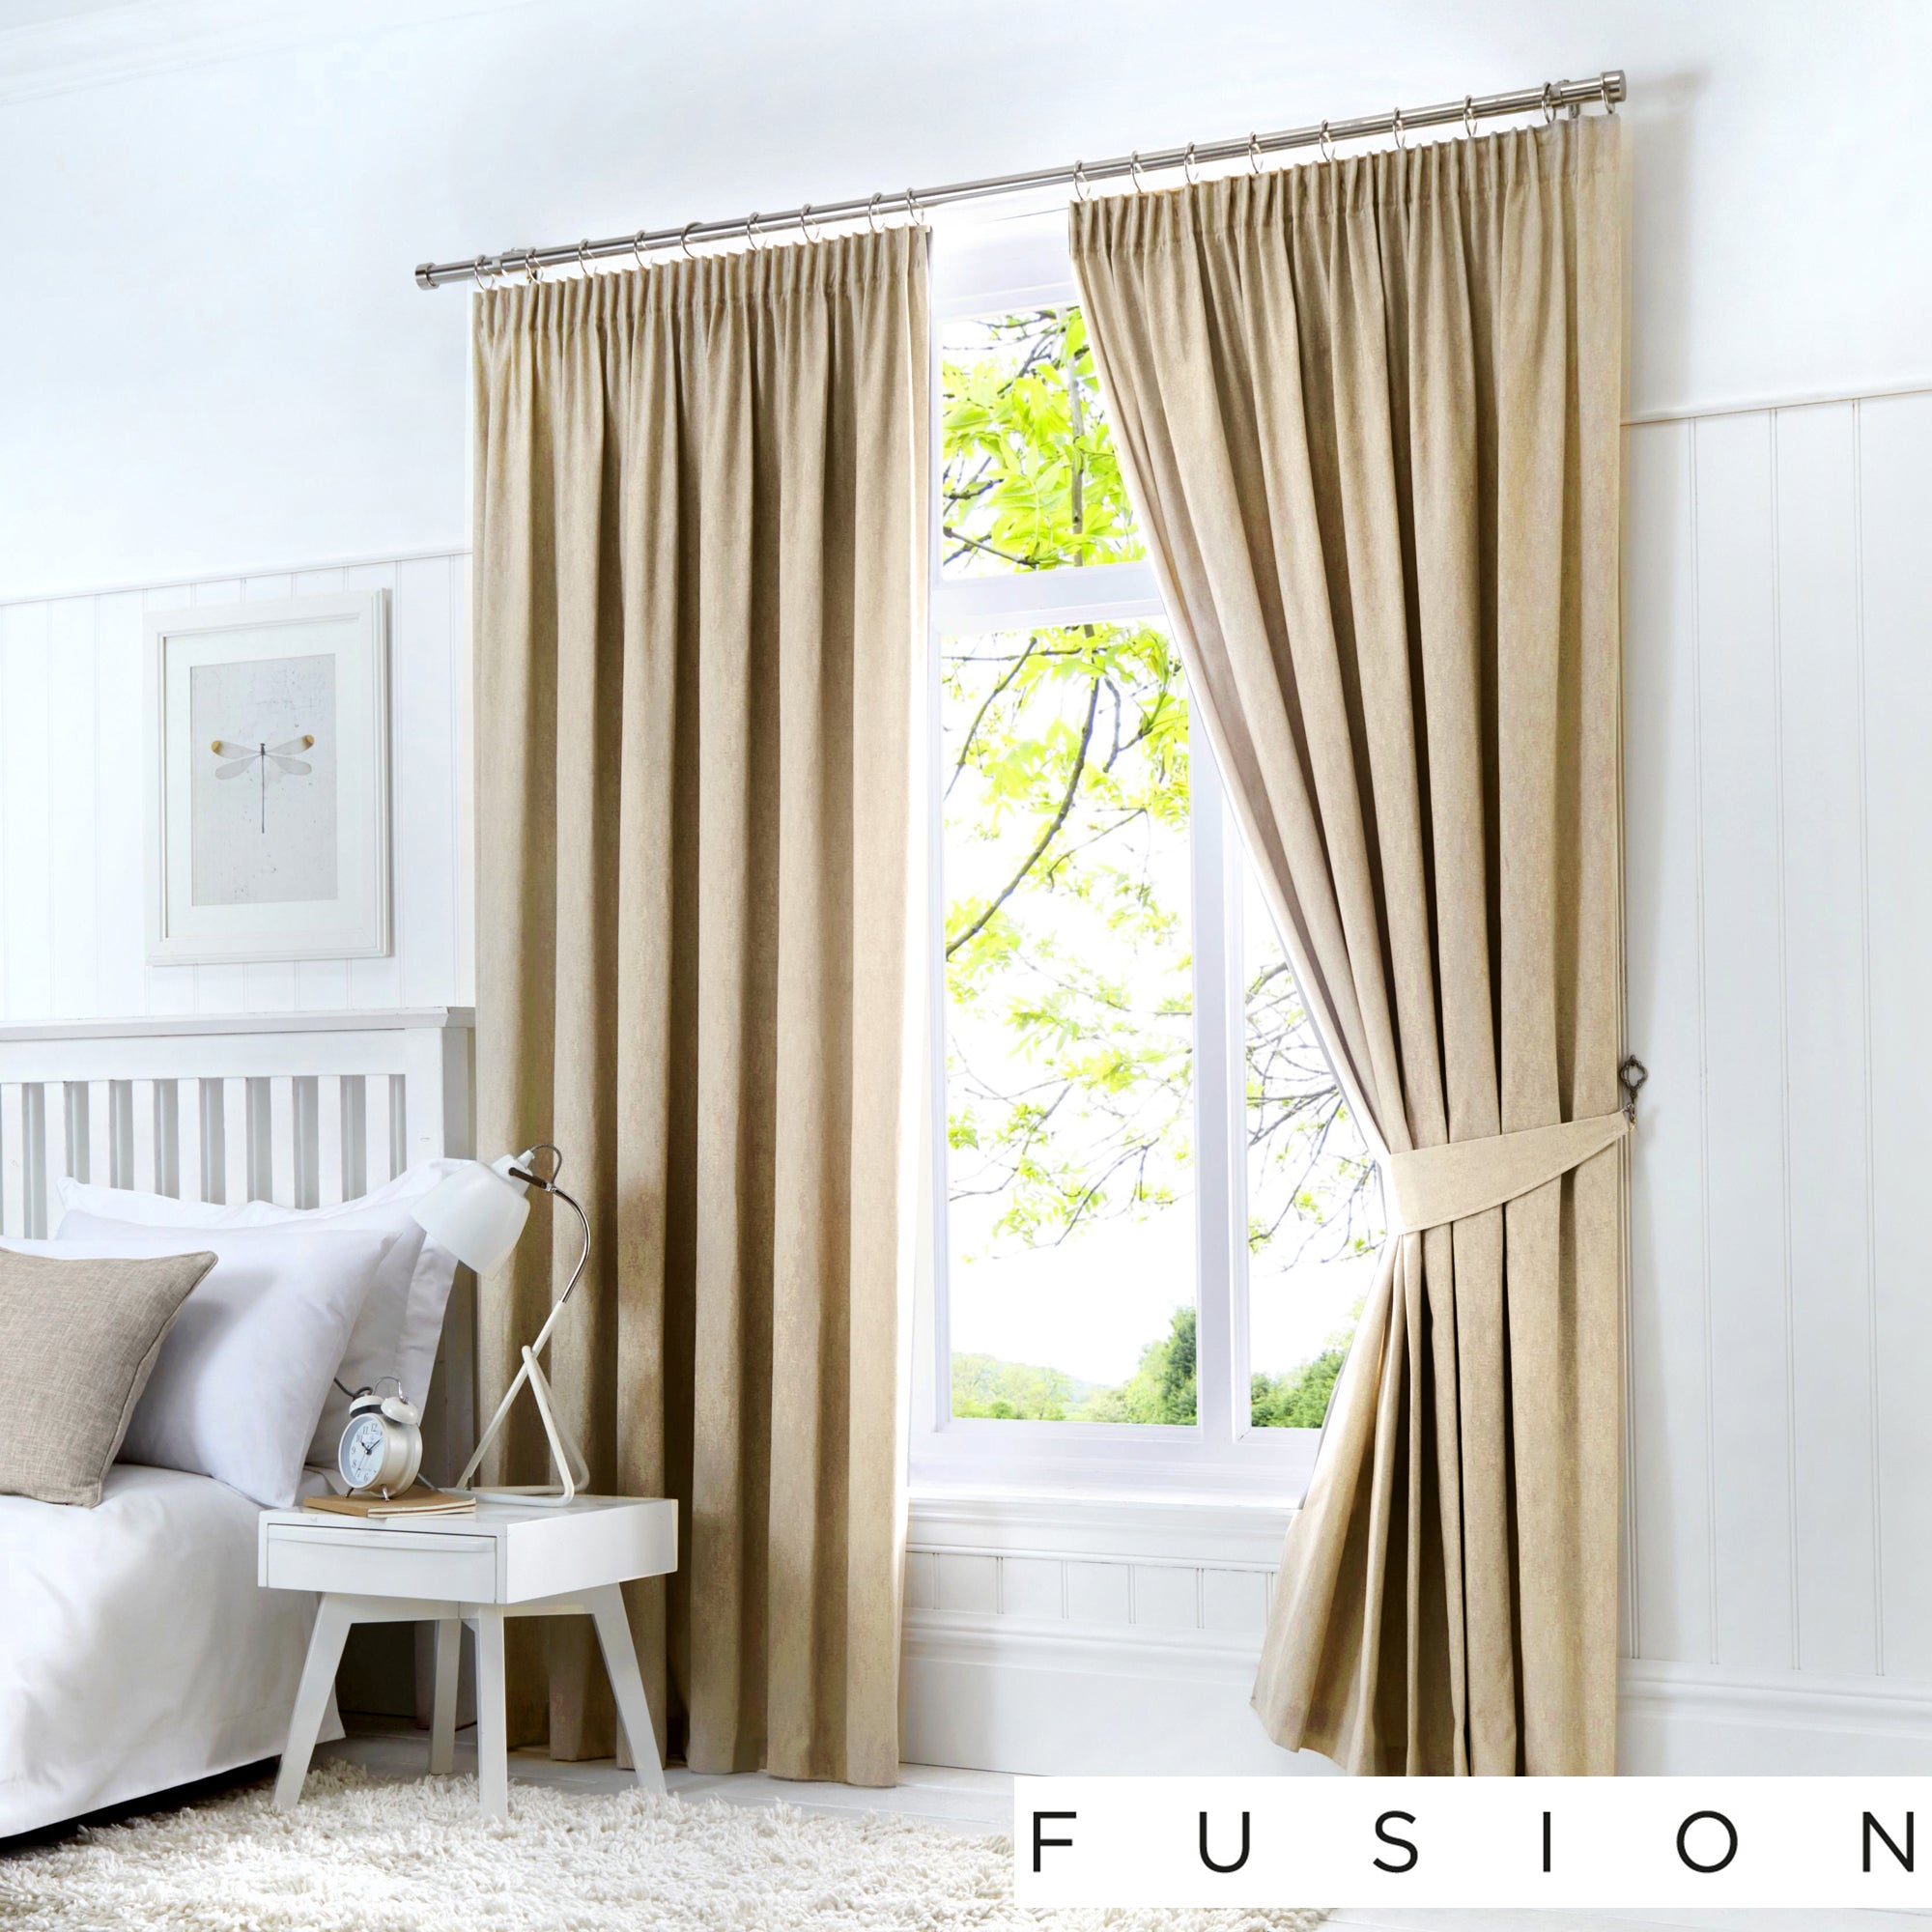 Dijon - Blackout Pair of Pencil Pleat Curtains in Natural - by Fusion